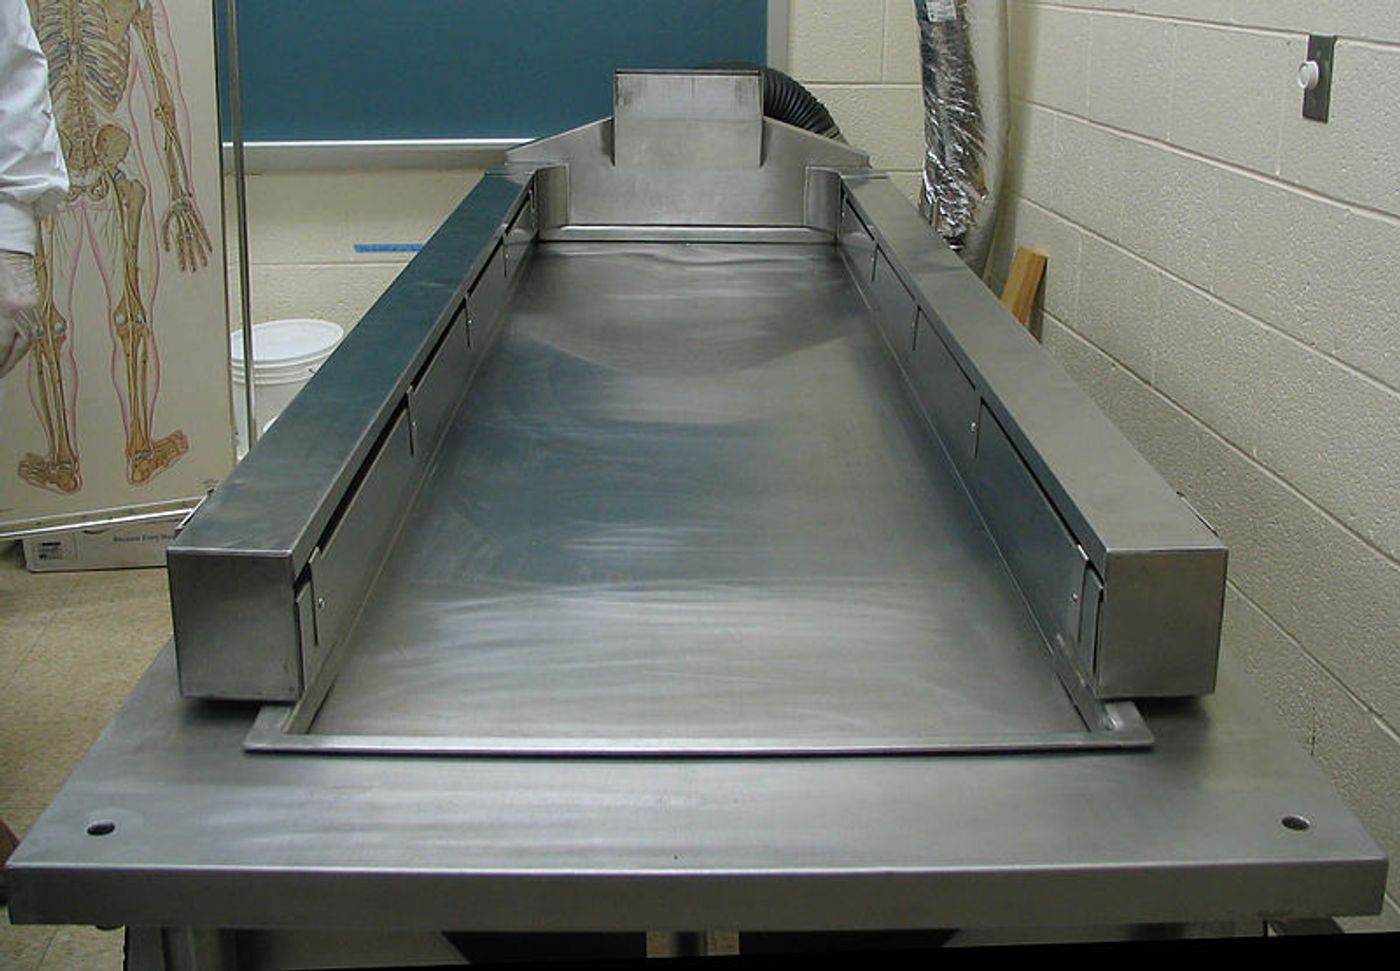 A cadaver dissection table.